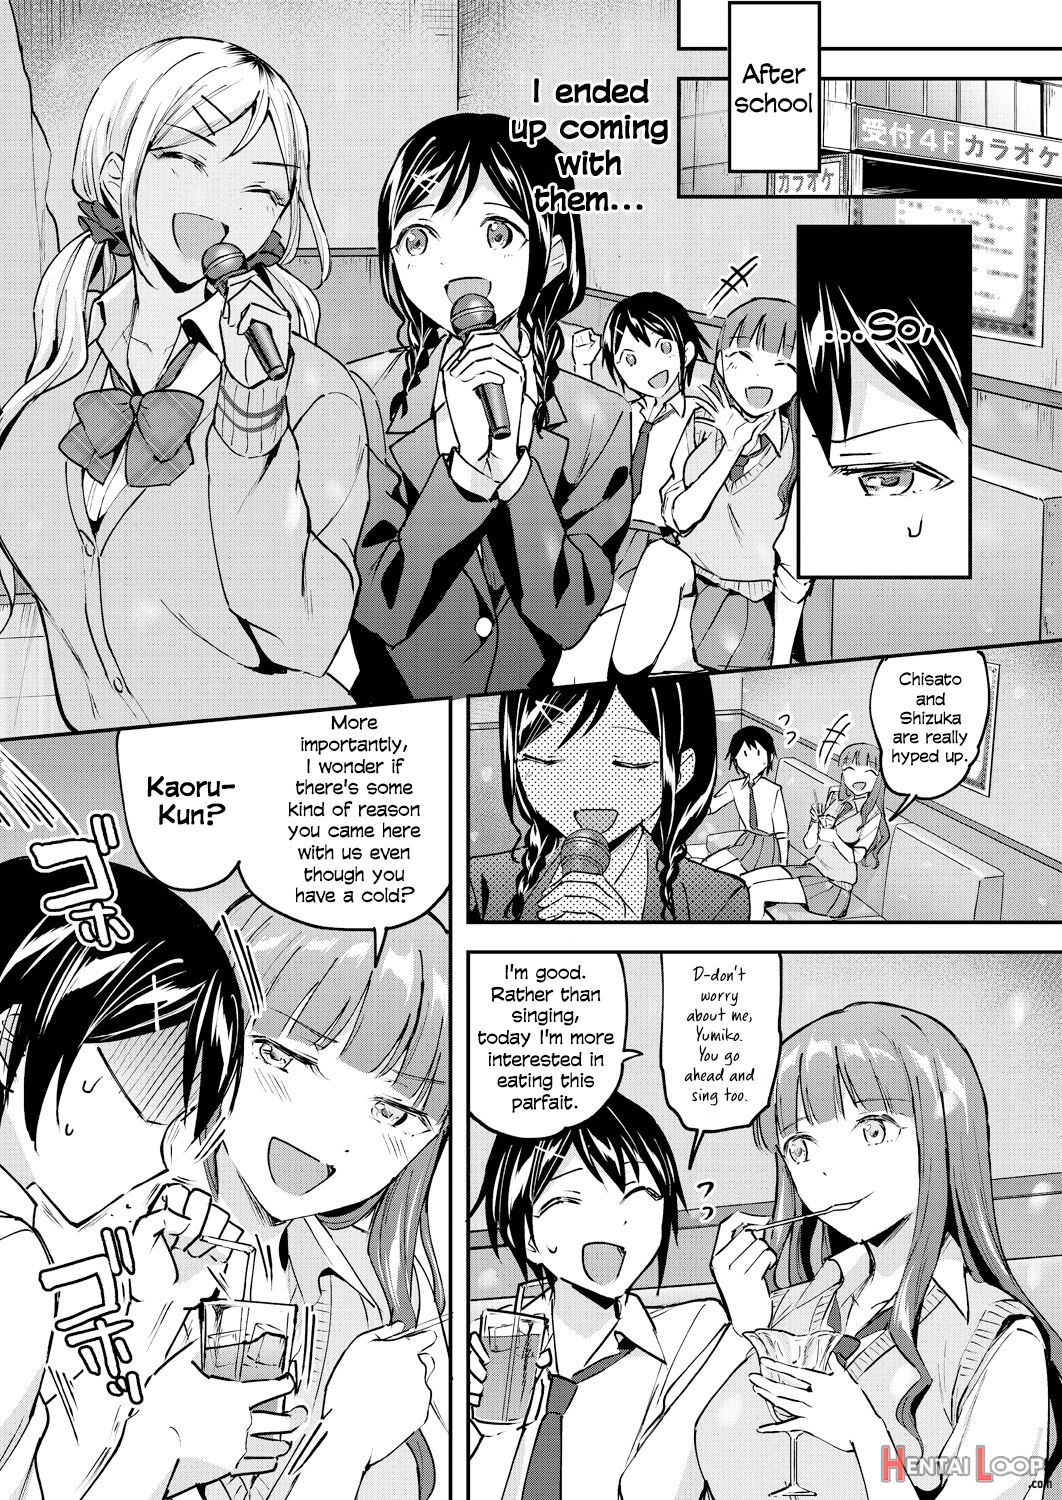 The Lustful Maidens Of The All Girls School page 7